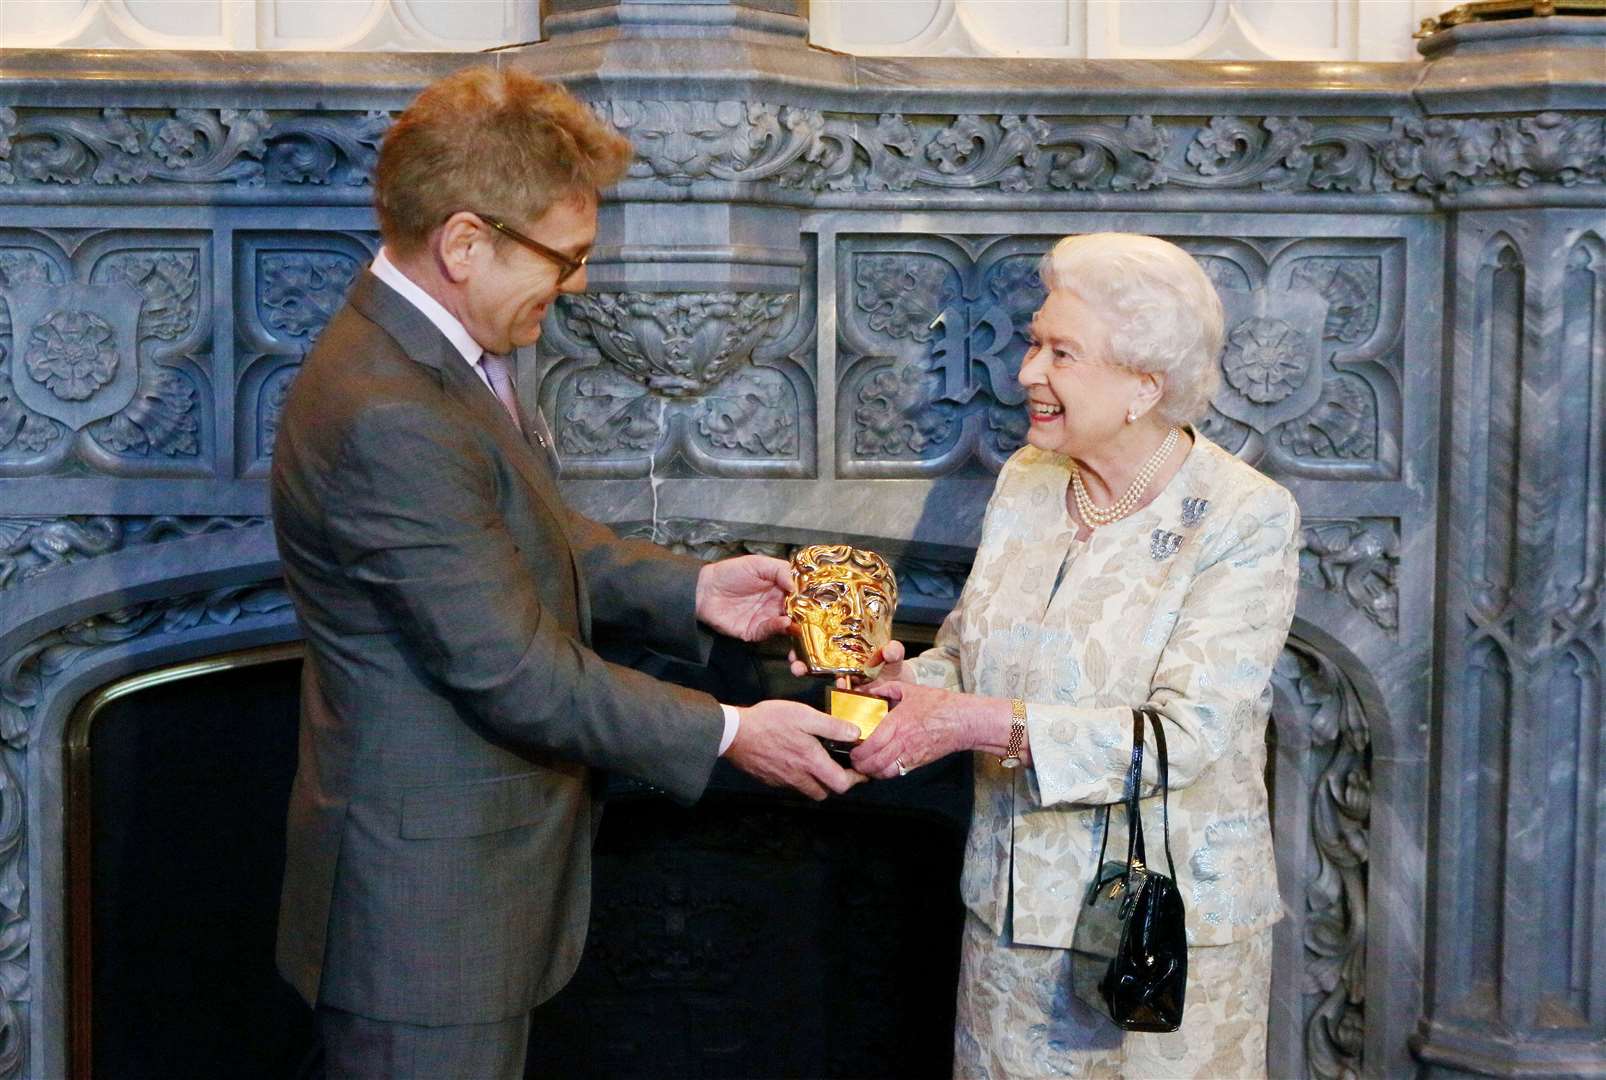 The Queen receives an honorary Bafta from Sir Kenneth Branagh for a lifetime’s support of British film and television in 2013 (Steve Parsons/PA)